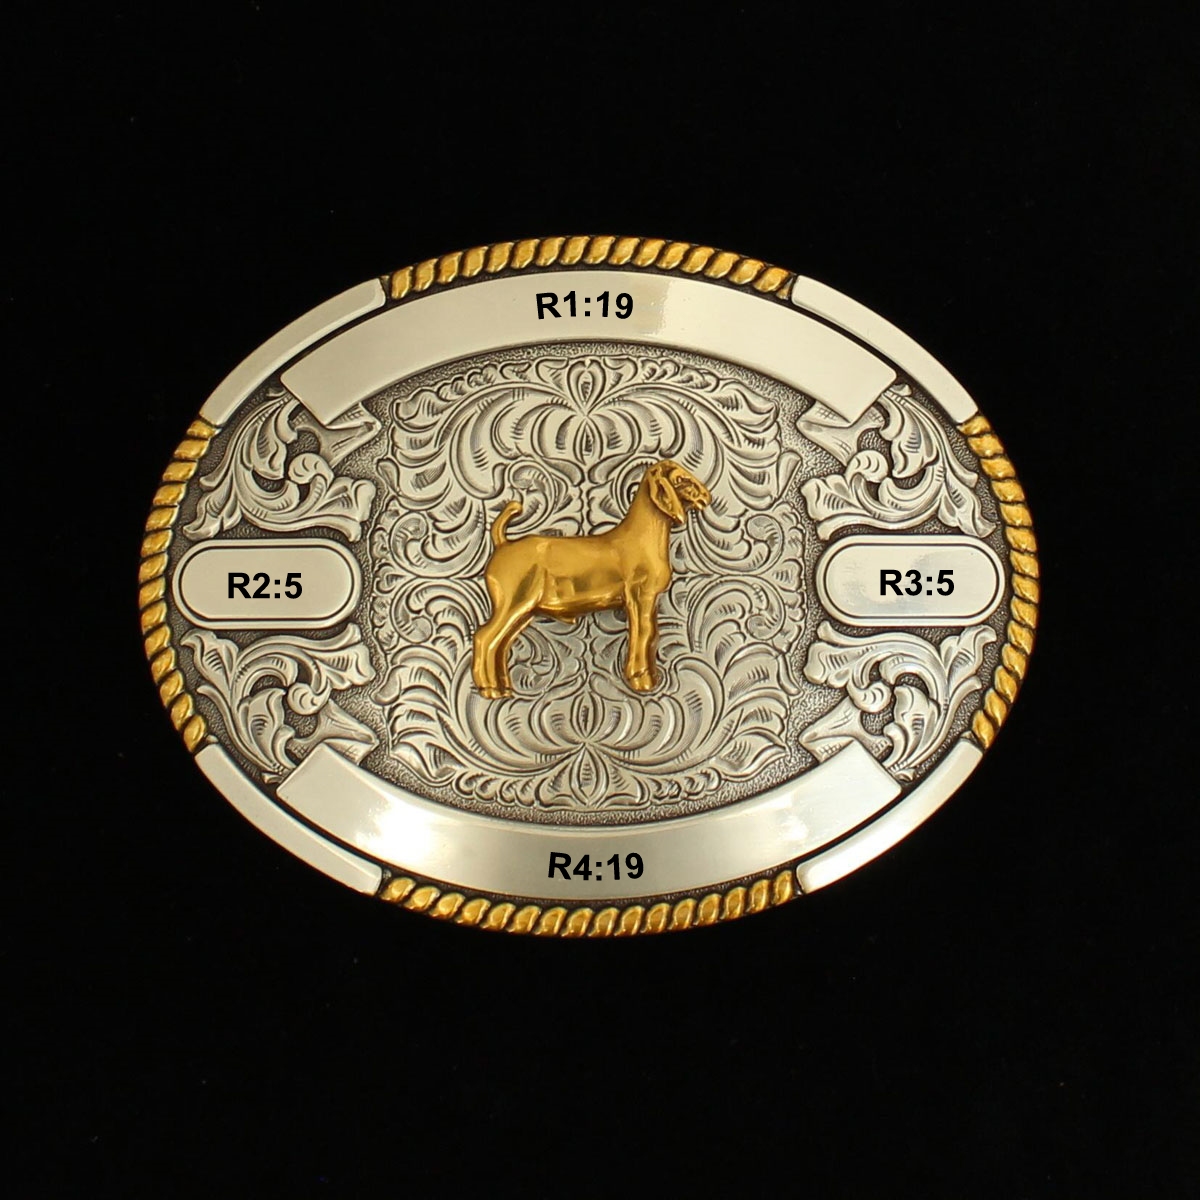 MF-38666 Trophy Buckle Oval Goat 4 Ribbons 3-1/2x4-1/2